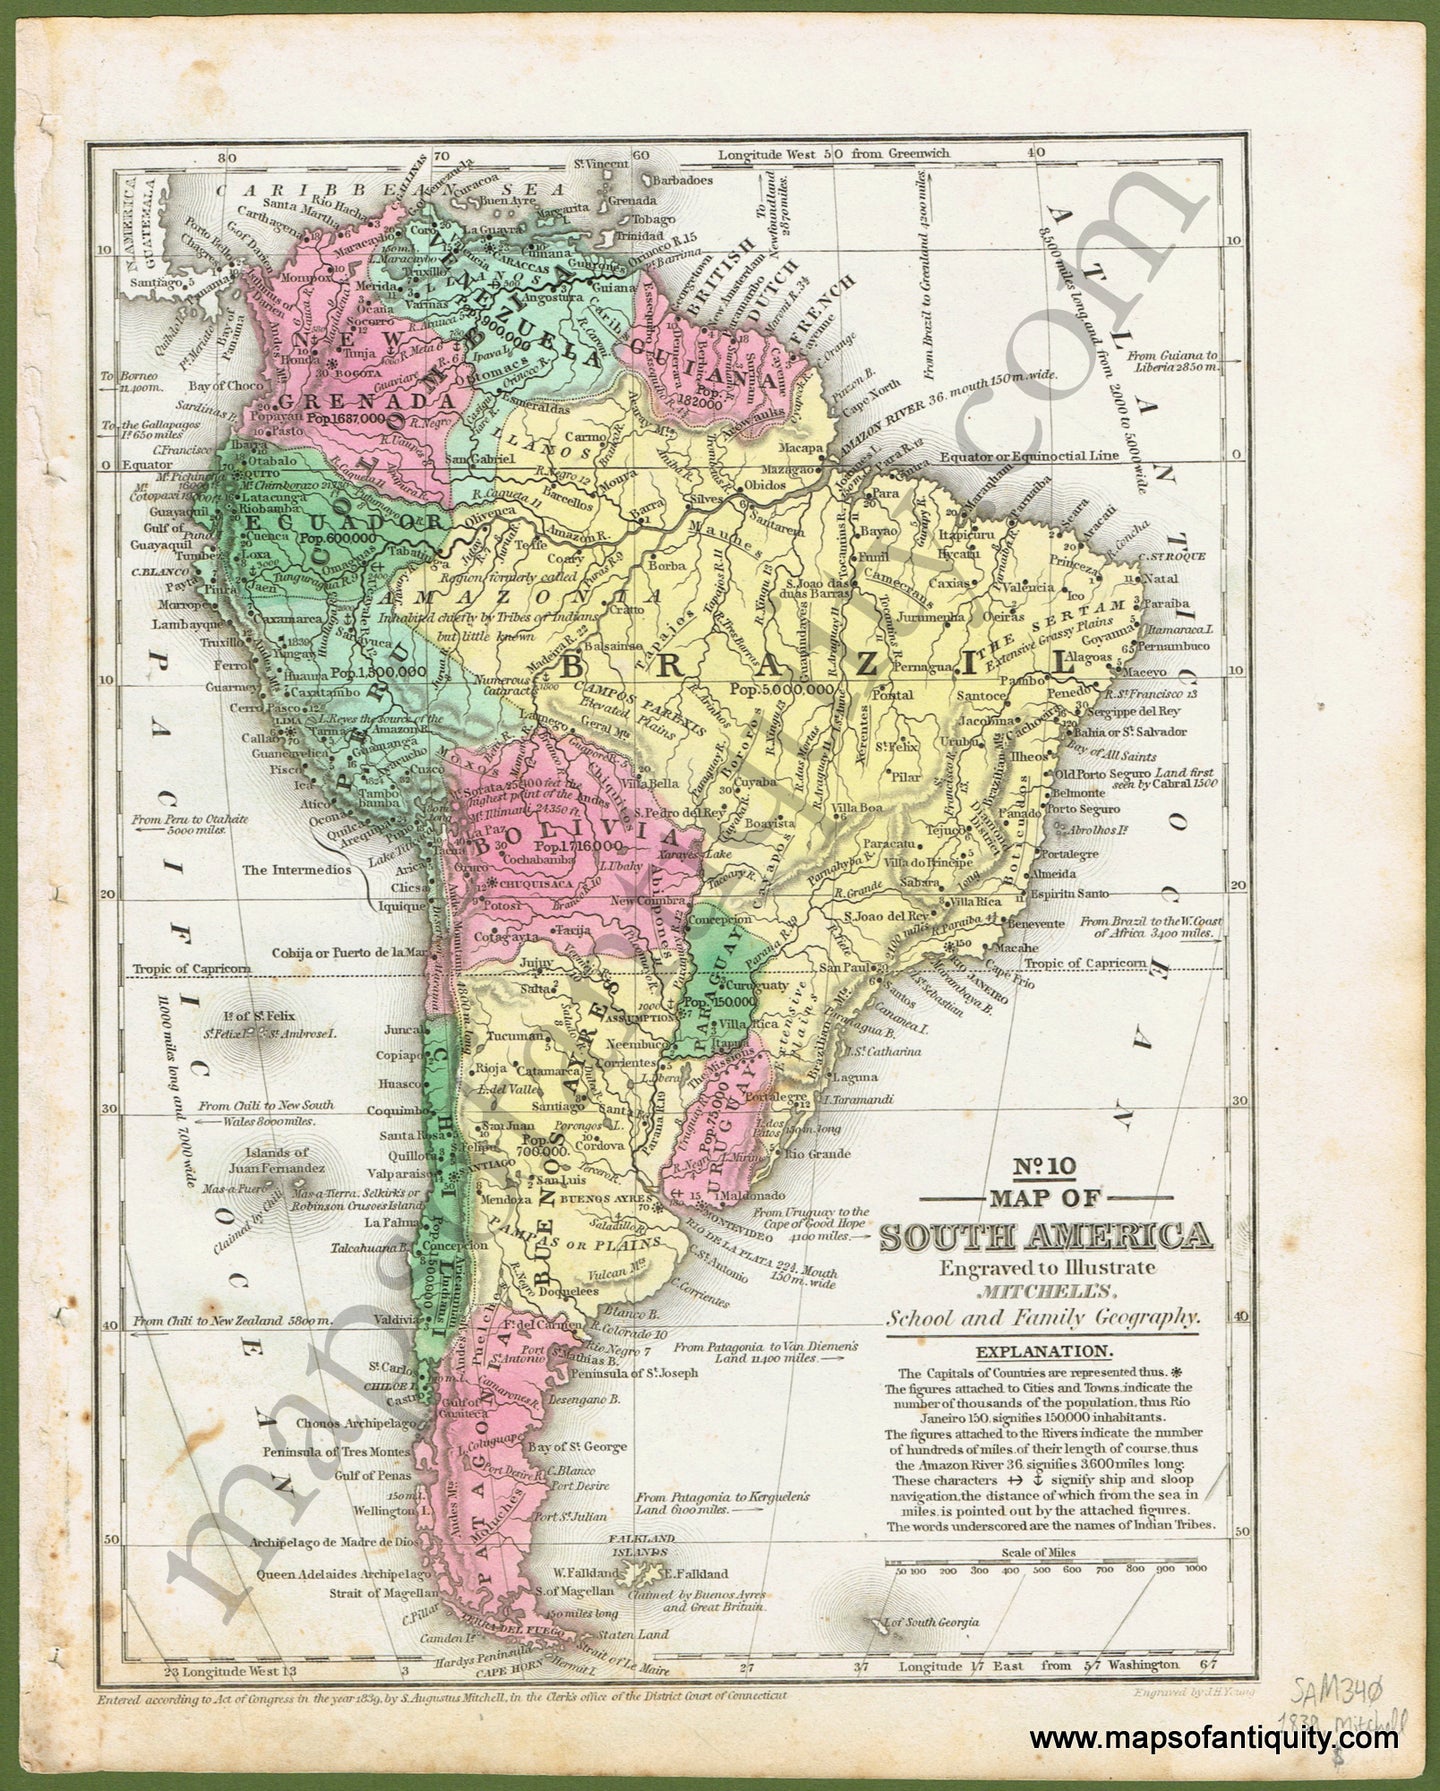 Antique-Hand-Colored-Map-No.-10-Map-of-South-America-Caribbean-&-Latin-America-South-America-1839-Mitchell-Maps-Of-Antiquity